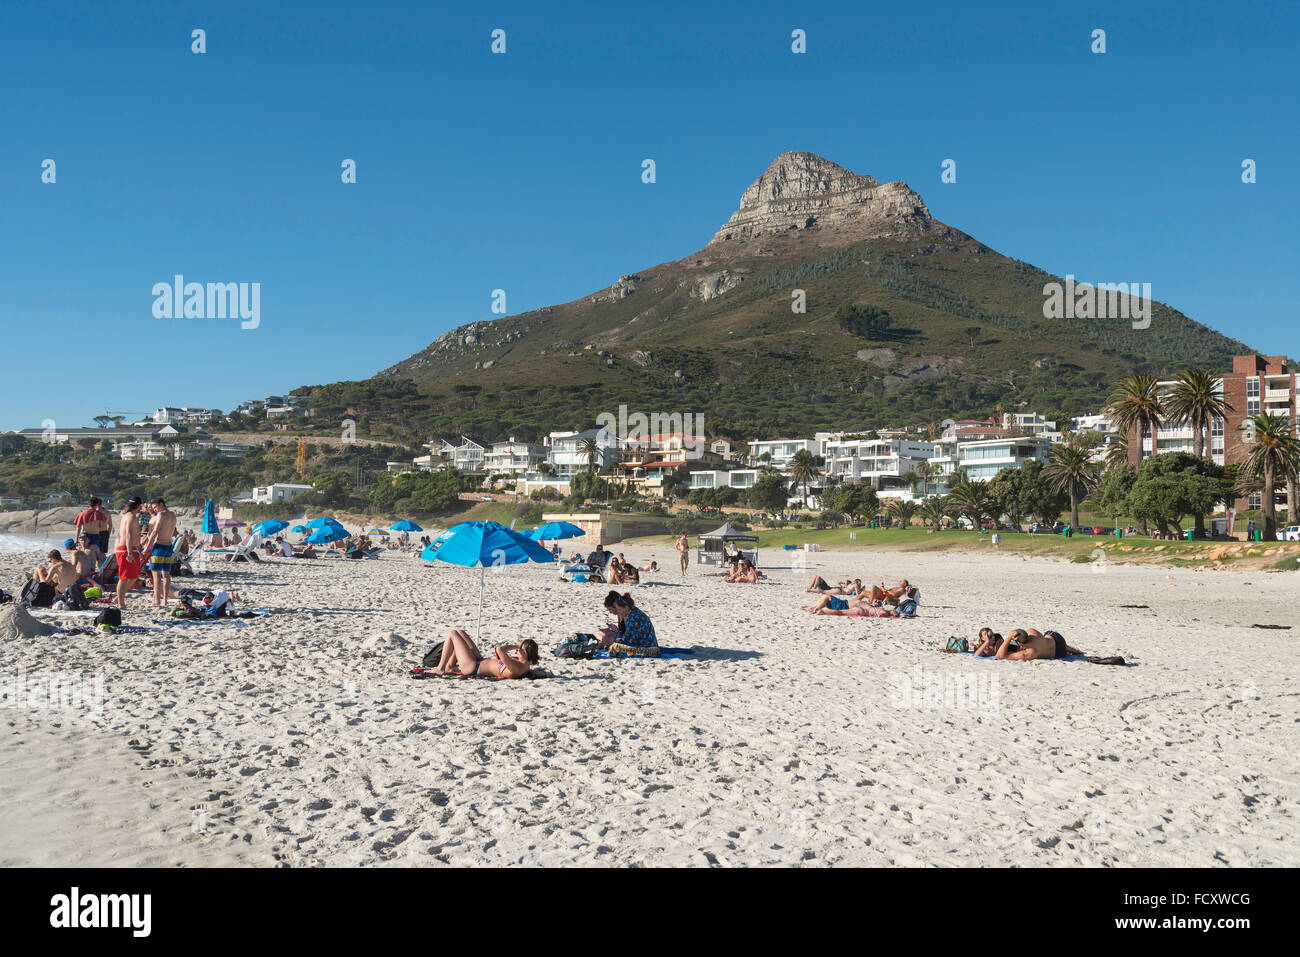 Camps Bay Beach, Camps Bay, Cape Town, City of Cape Town Municipality, Western Cape Province, Republic of South Africa Stock Photo